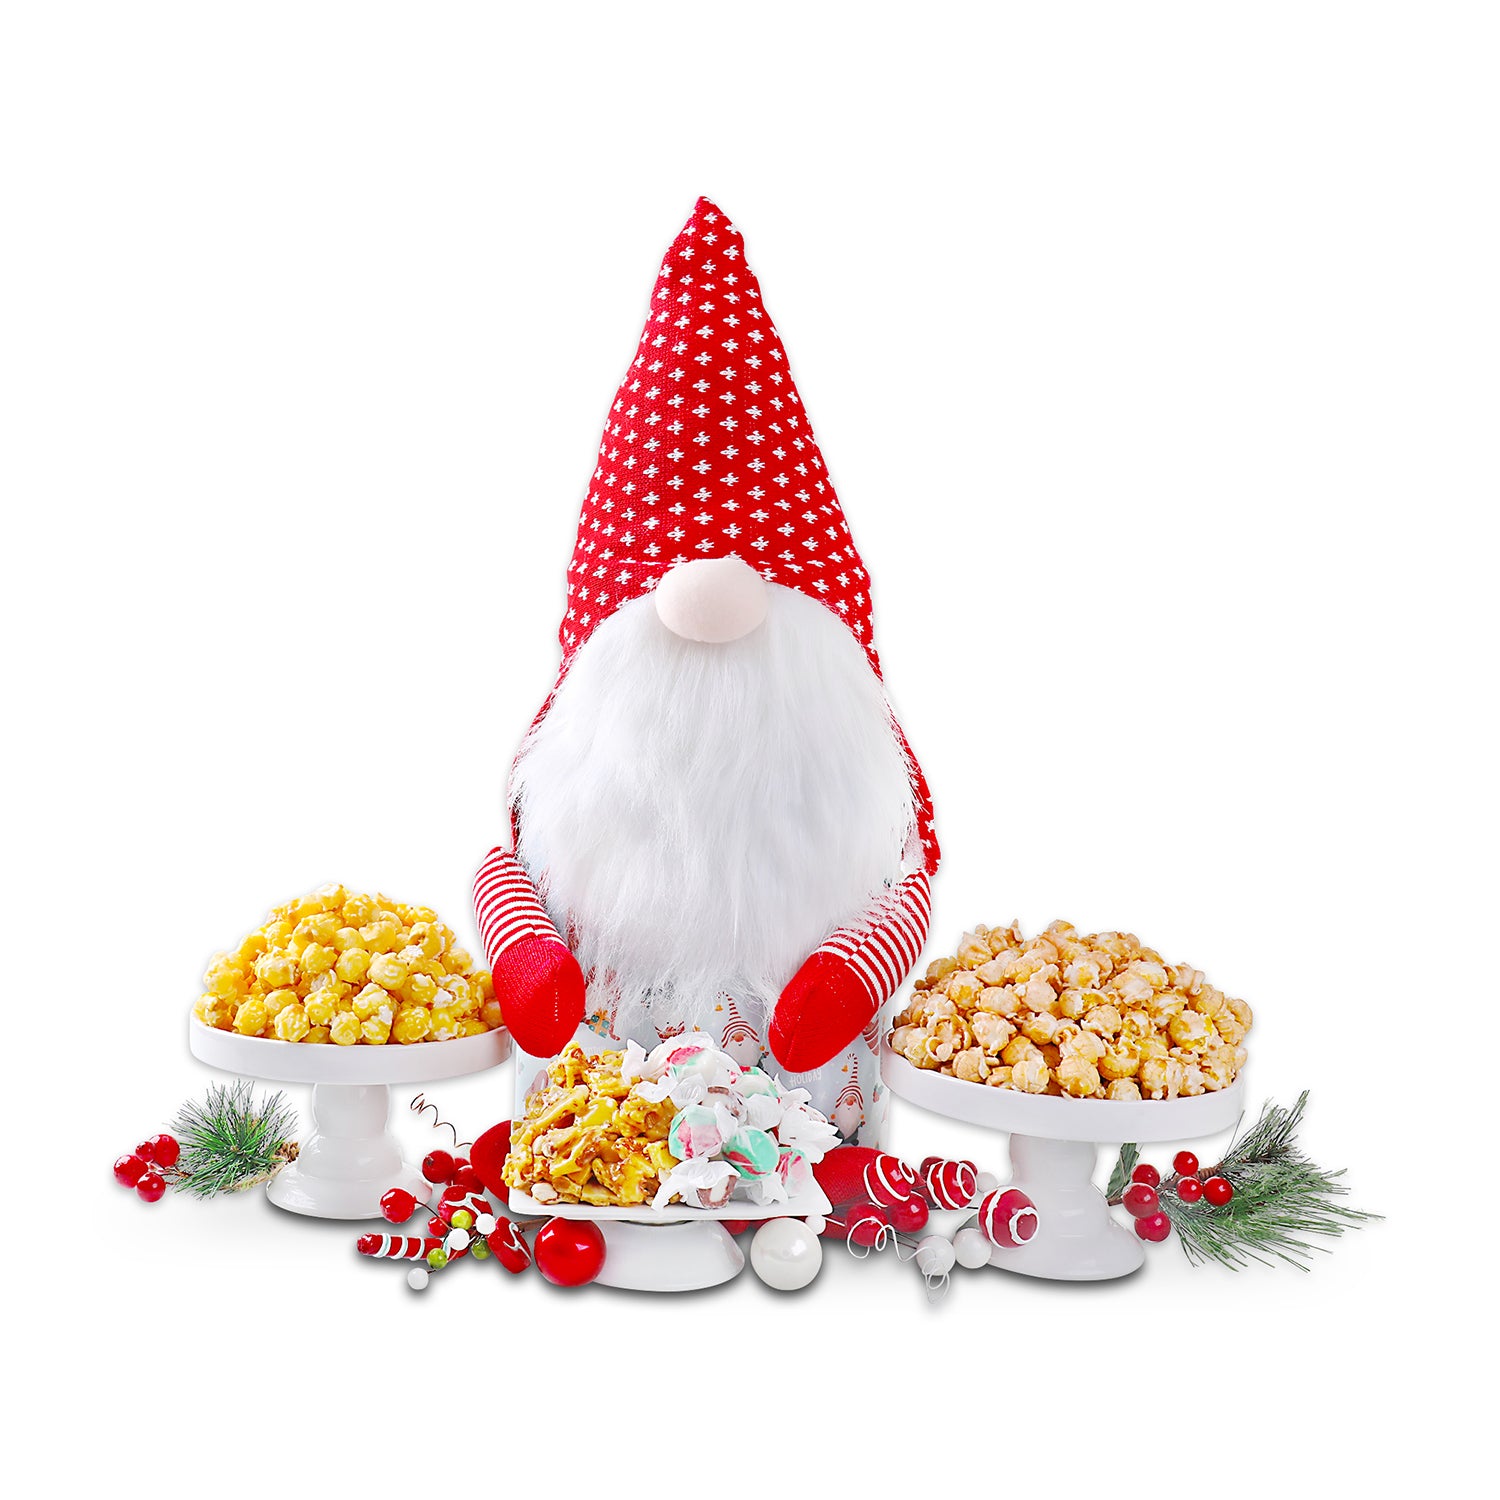 Cinnamon Sugar Churro Popcorn (6oz.), Butter Toffee Popcorn (6oz.), Festive Holiday Salt Water Taffy (3.5oz.), Old Fashion Peanut Brittle (4oz.), Gnome with red and white hat Tower